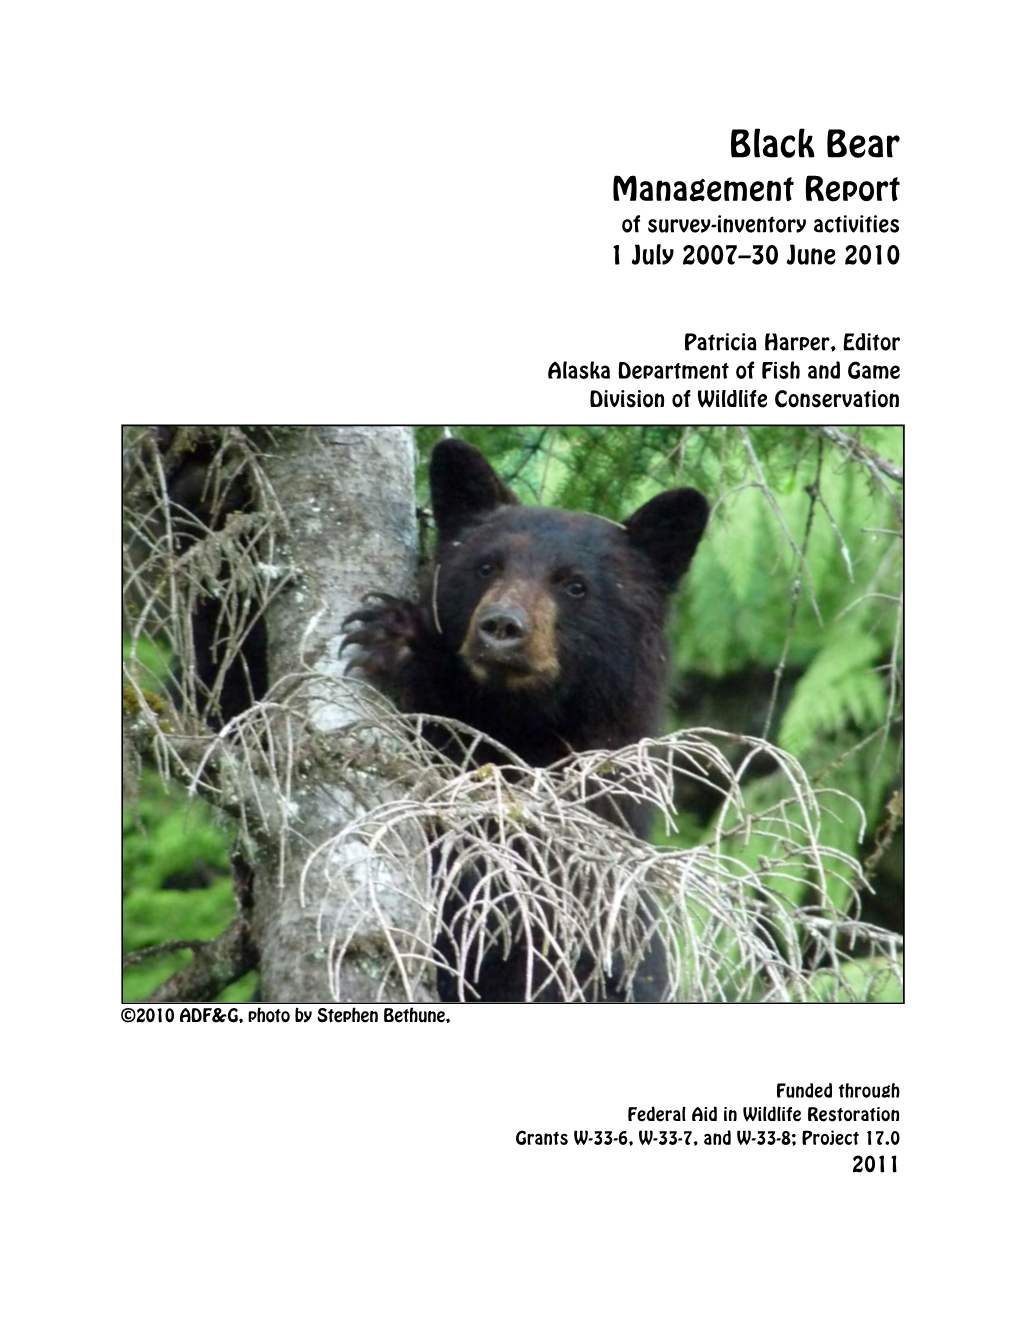 Black Bear Management Reports of Survey-Inventory Activities, 1 July